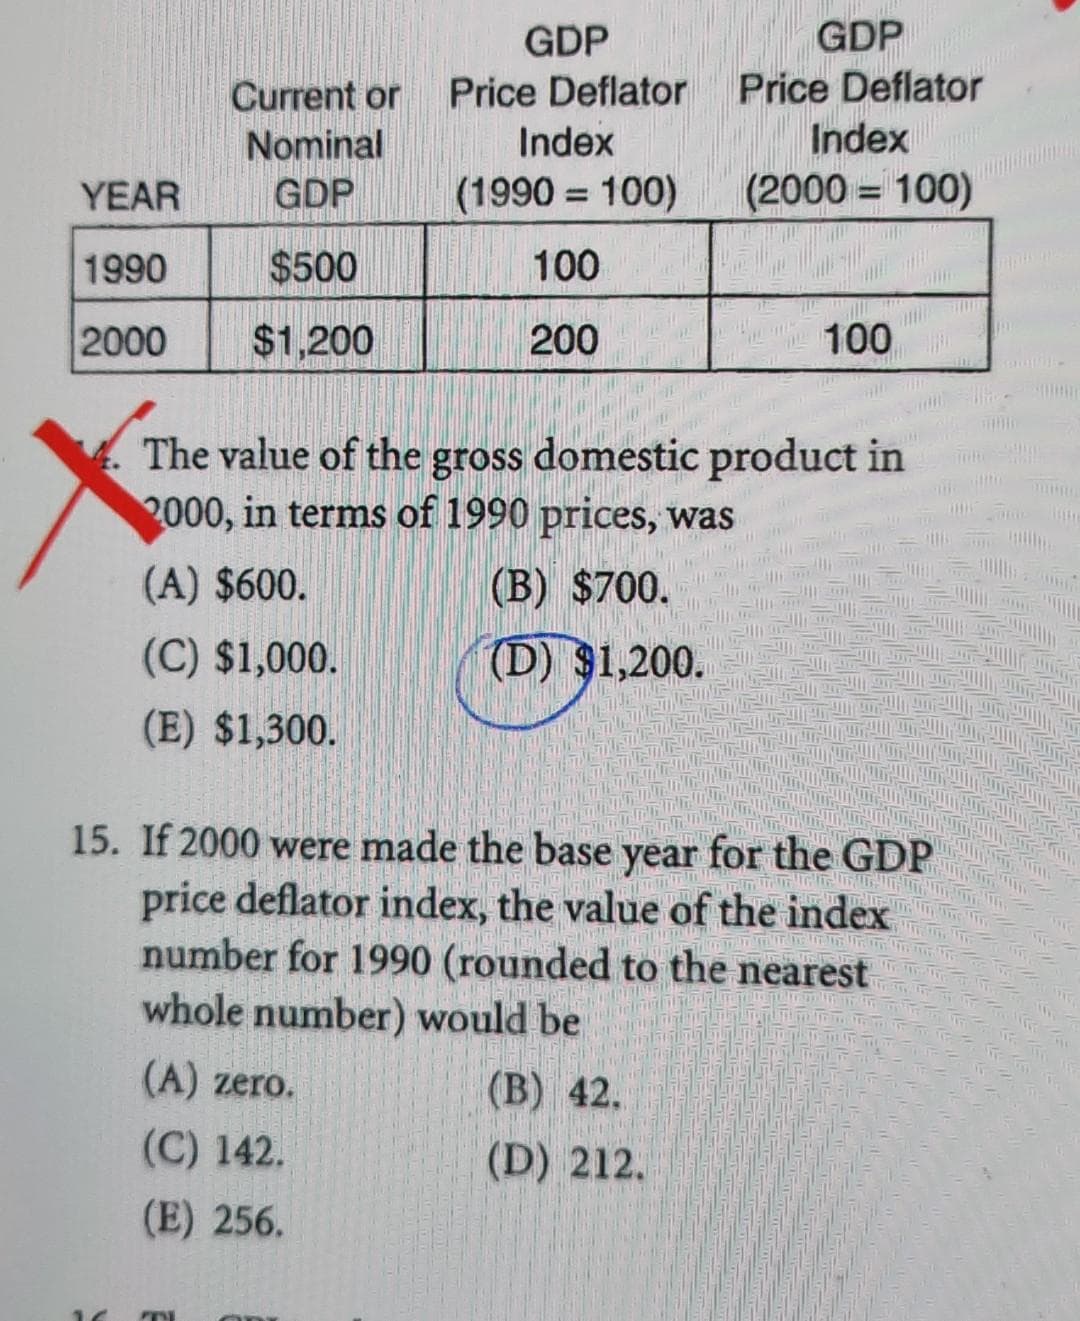 GDP
Price Deflator
Index
GDP
Price Deflator
Index
Current or
Nominal
YEAR
GDP
(1990 = 100)
(2000 = 100)
%3D
1990
$500
100
2000
$1,200
200
100
The value of the gross domestic product in
2000, in terms of 1990 prices, was
(A) $600.
(B) $700.
(C) $1,000.
(D) $1,200.
(E) $1,300.
15. If 2000 were made the base for the GDP
year
price deflator index, the value of the index
number for 1990 (rounded to the nearest
whole number) would be
ITATTT
(A) zero.
(B) 42.
(C) 142.
(D) 212.
(E) 256.
